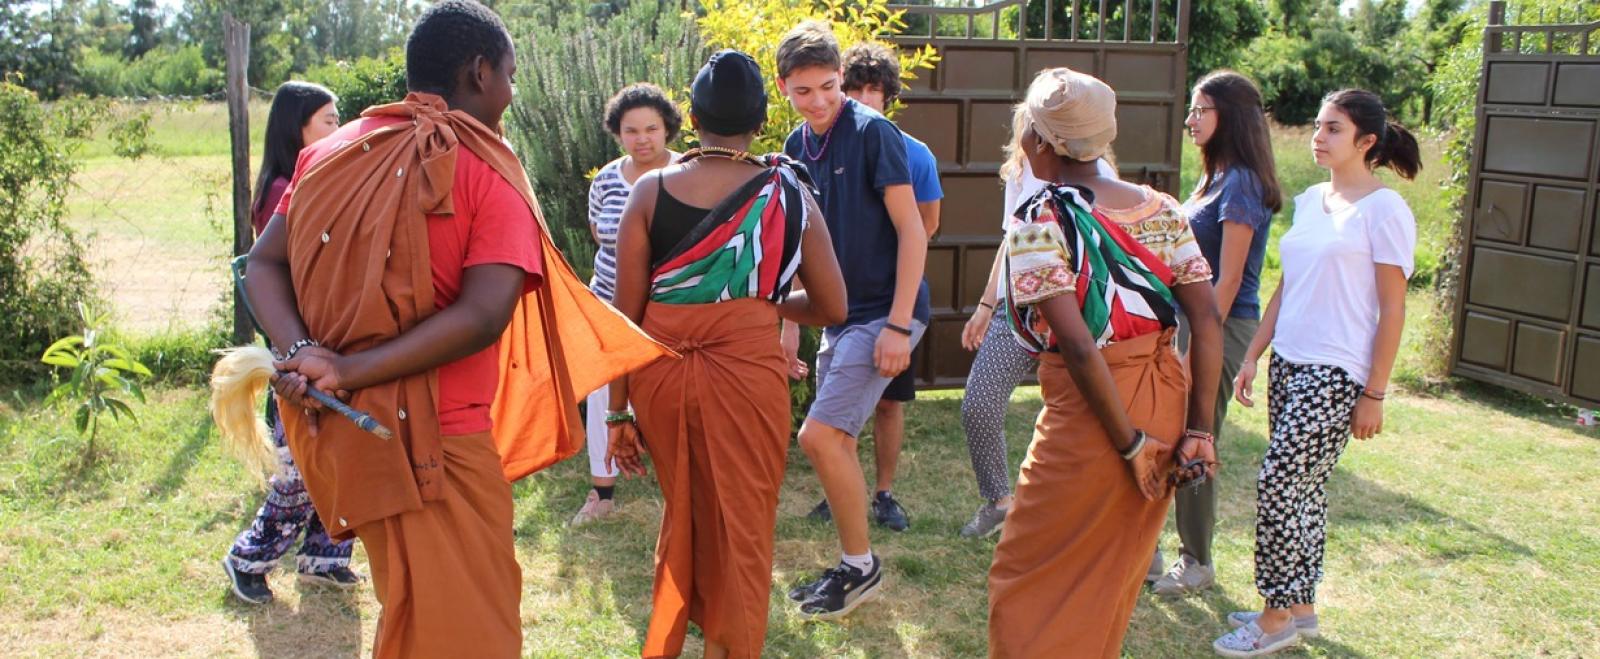 High school students volunteering in Kenya learn some local dance moves